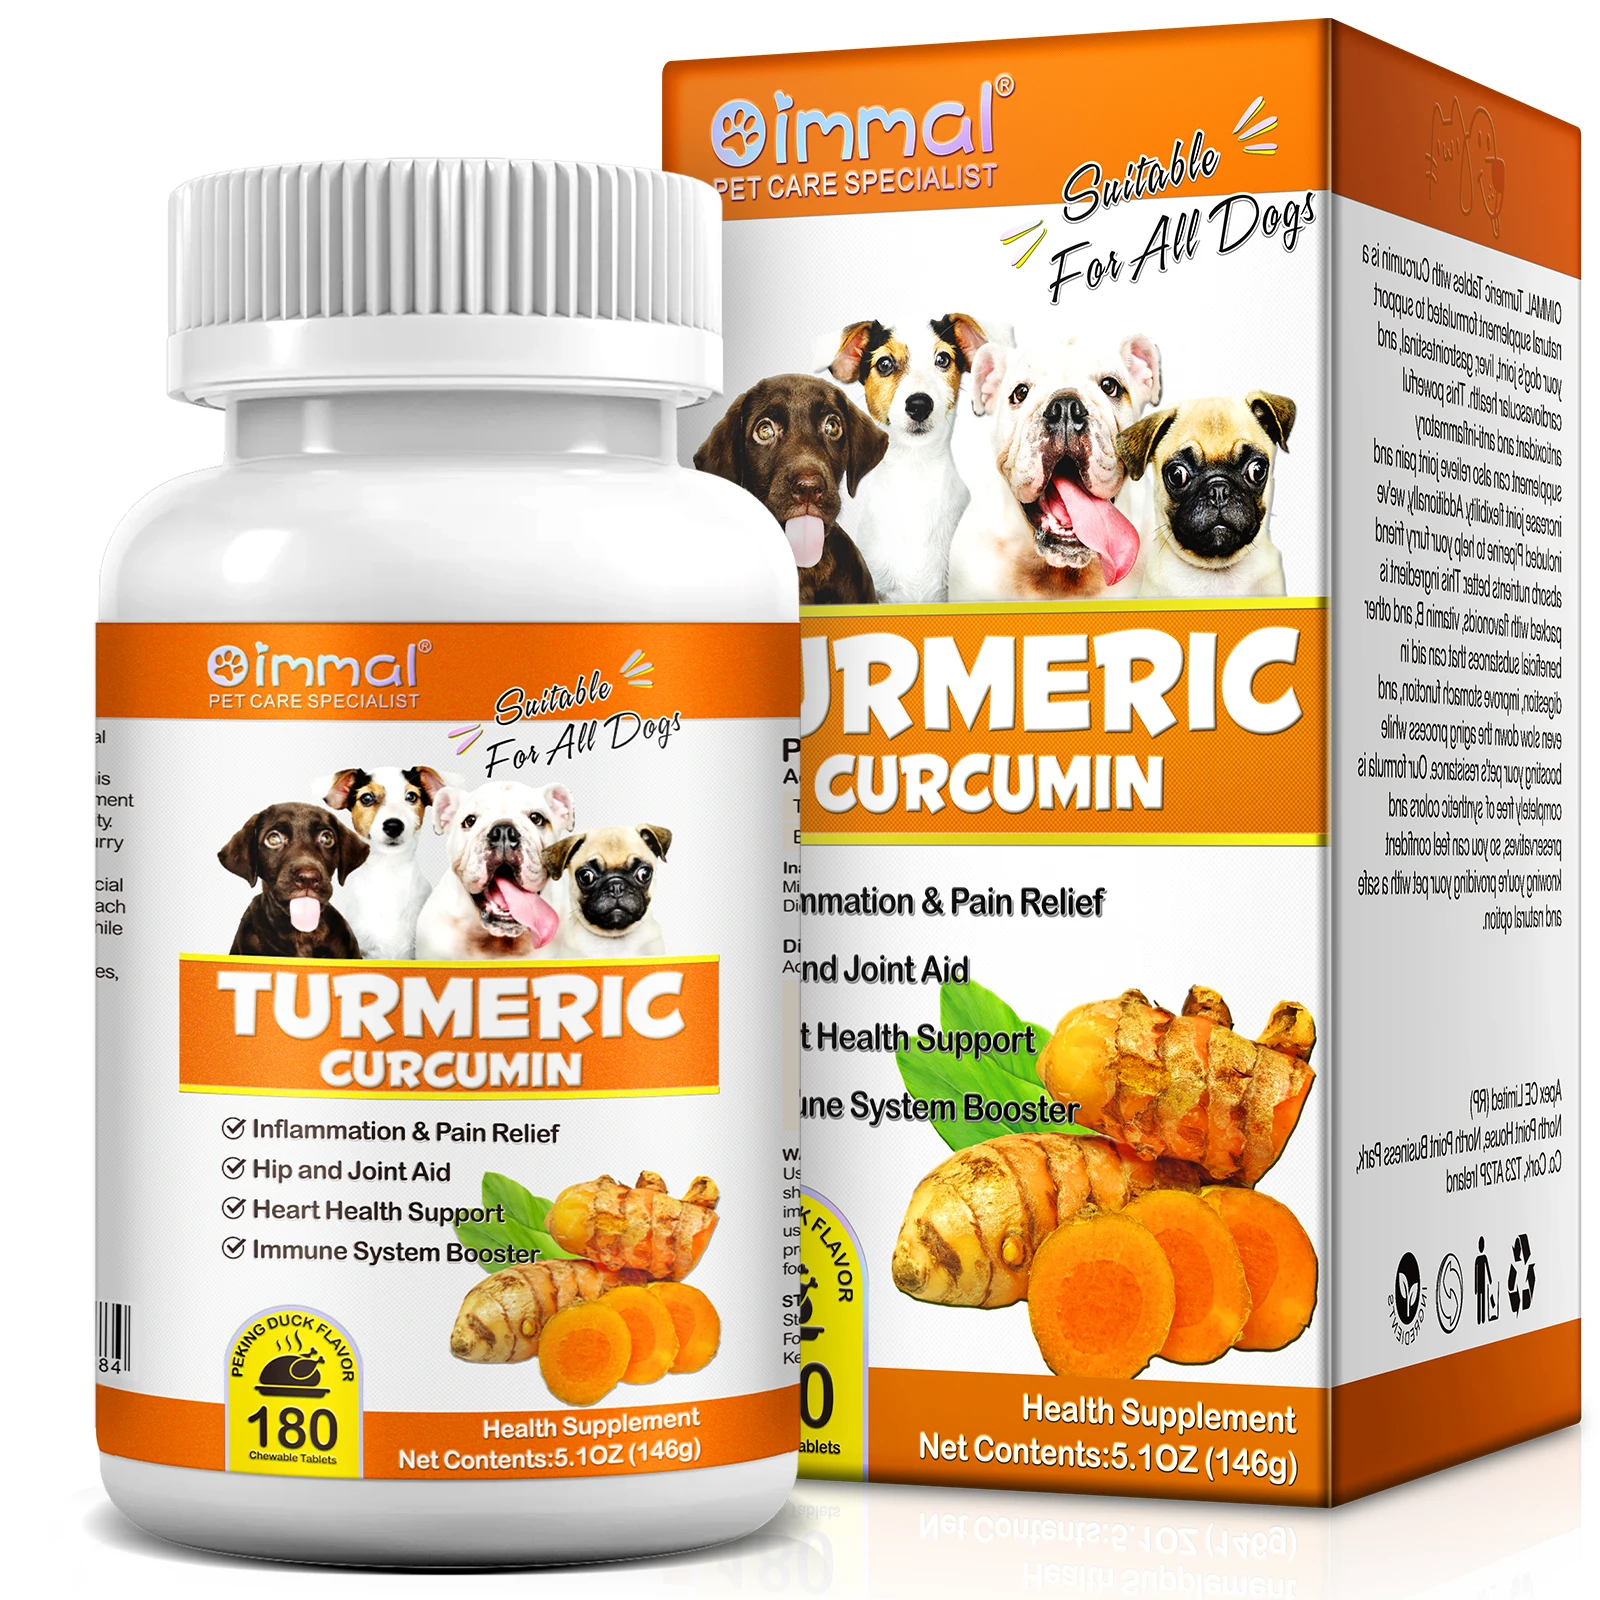 

Turmeric Curcumin 180 Chewable Tablets Supplements Aid Joints and HIPS Heart Health Support Inflammation & Pain Relief for Dogs